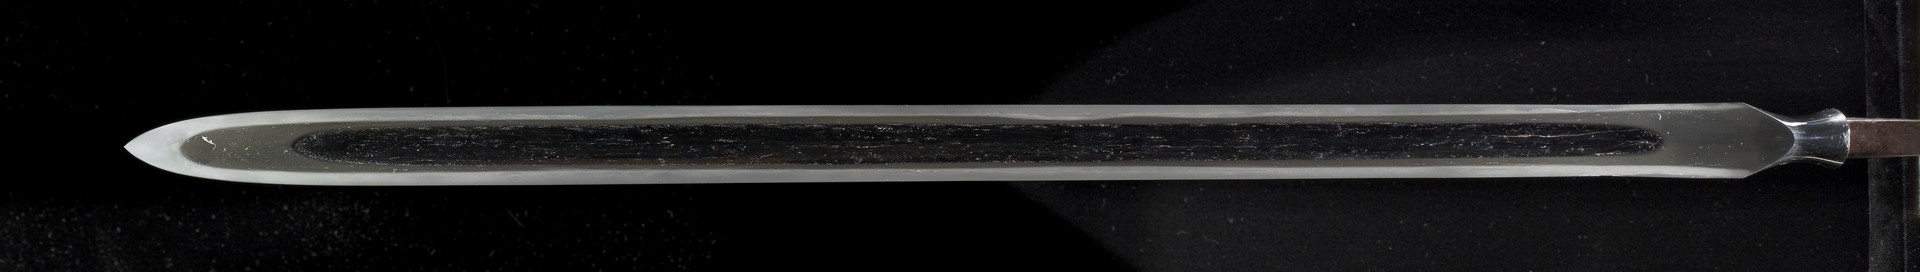 <i>Kaneshige Spearhead</i>, Muromachi period, 16th century, Tokyo National Museum, Japan ⓒColBase (https://colbase.nich.go.jp/)